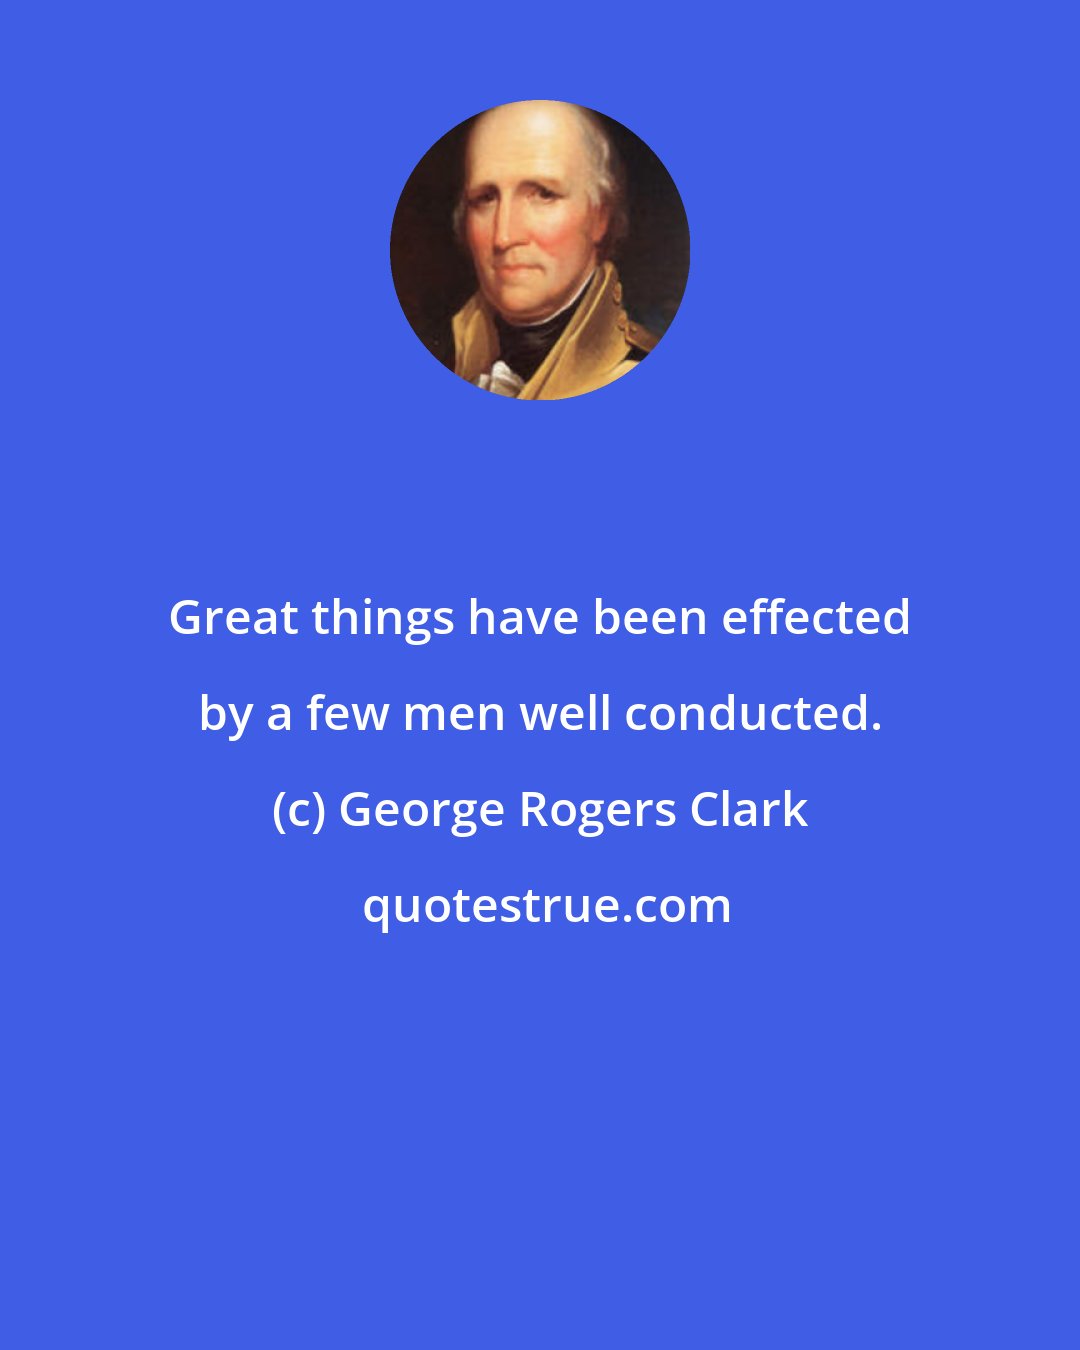 George Rogers Clark: Great things have been effected by a few men well conducted.